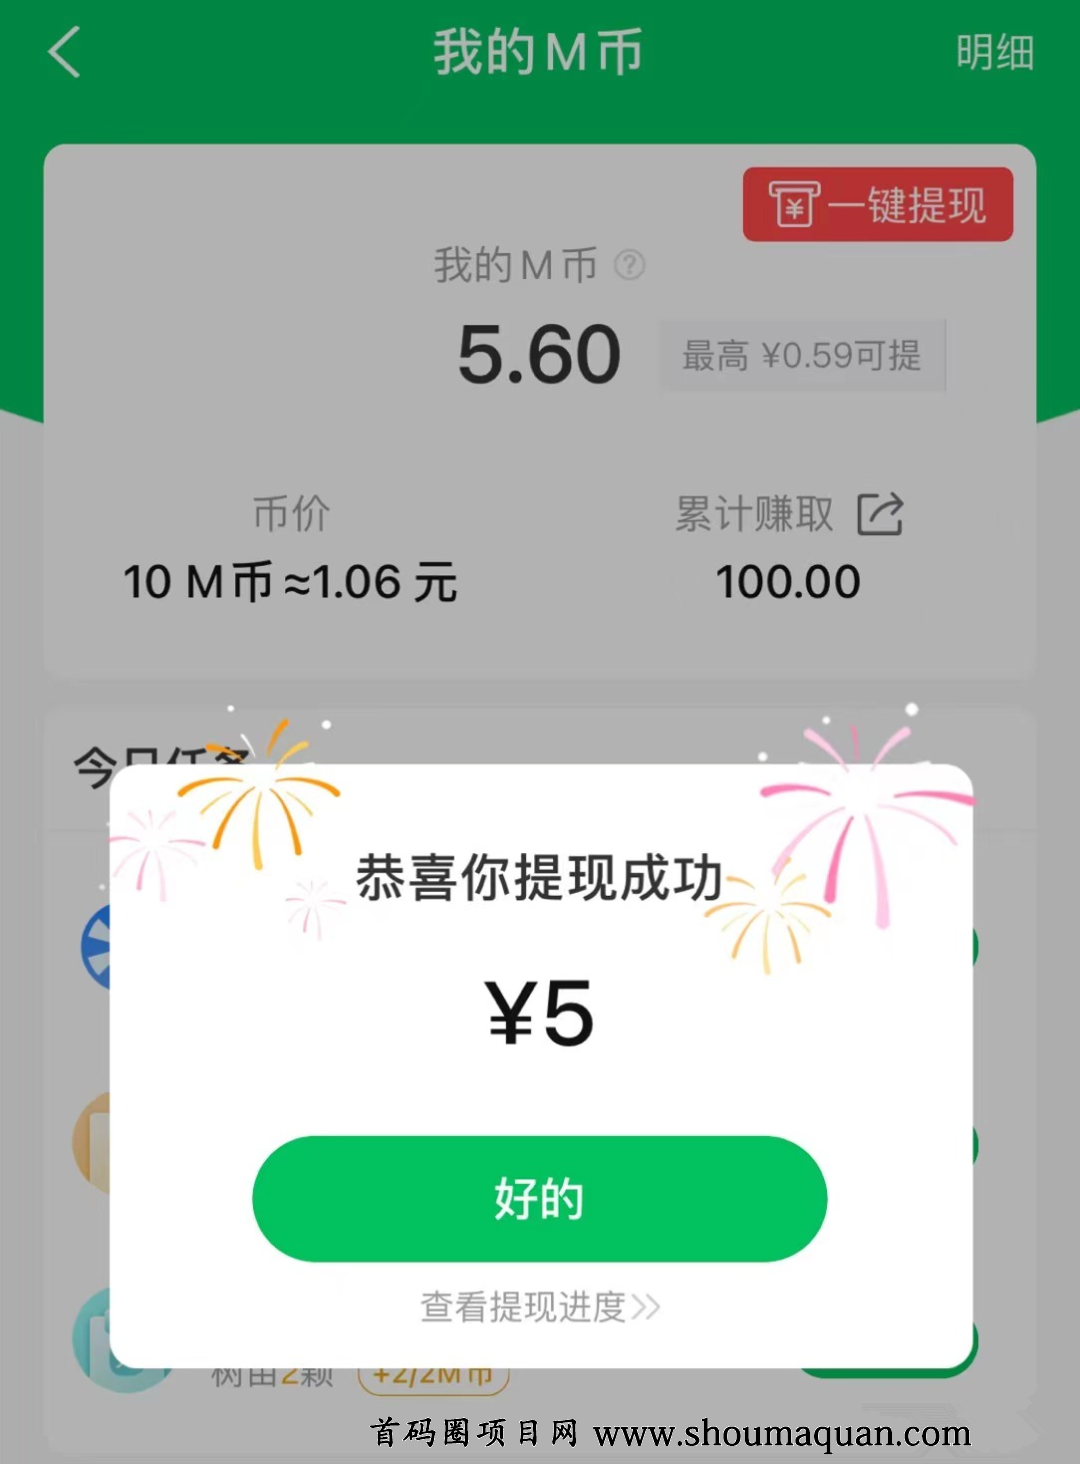 V信图片_20220427130037.png